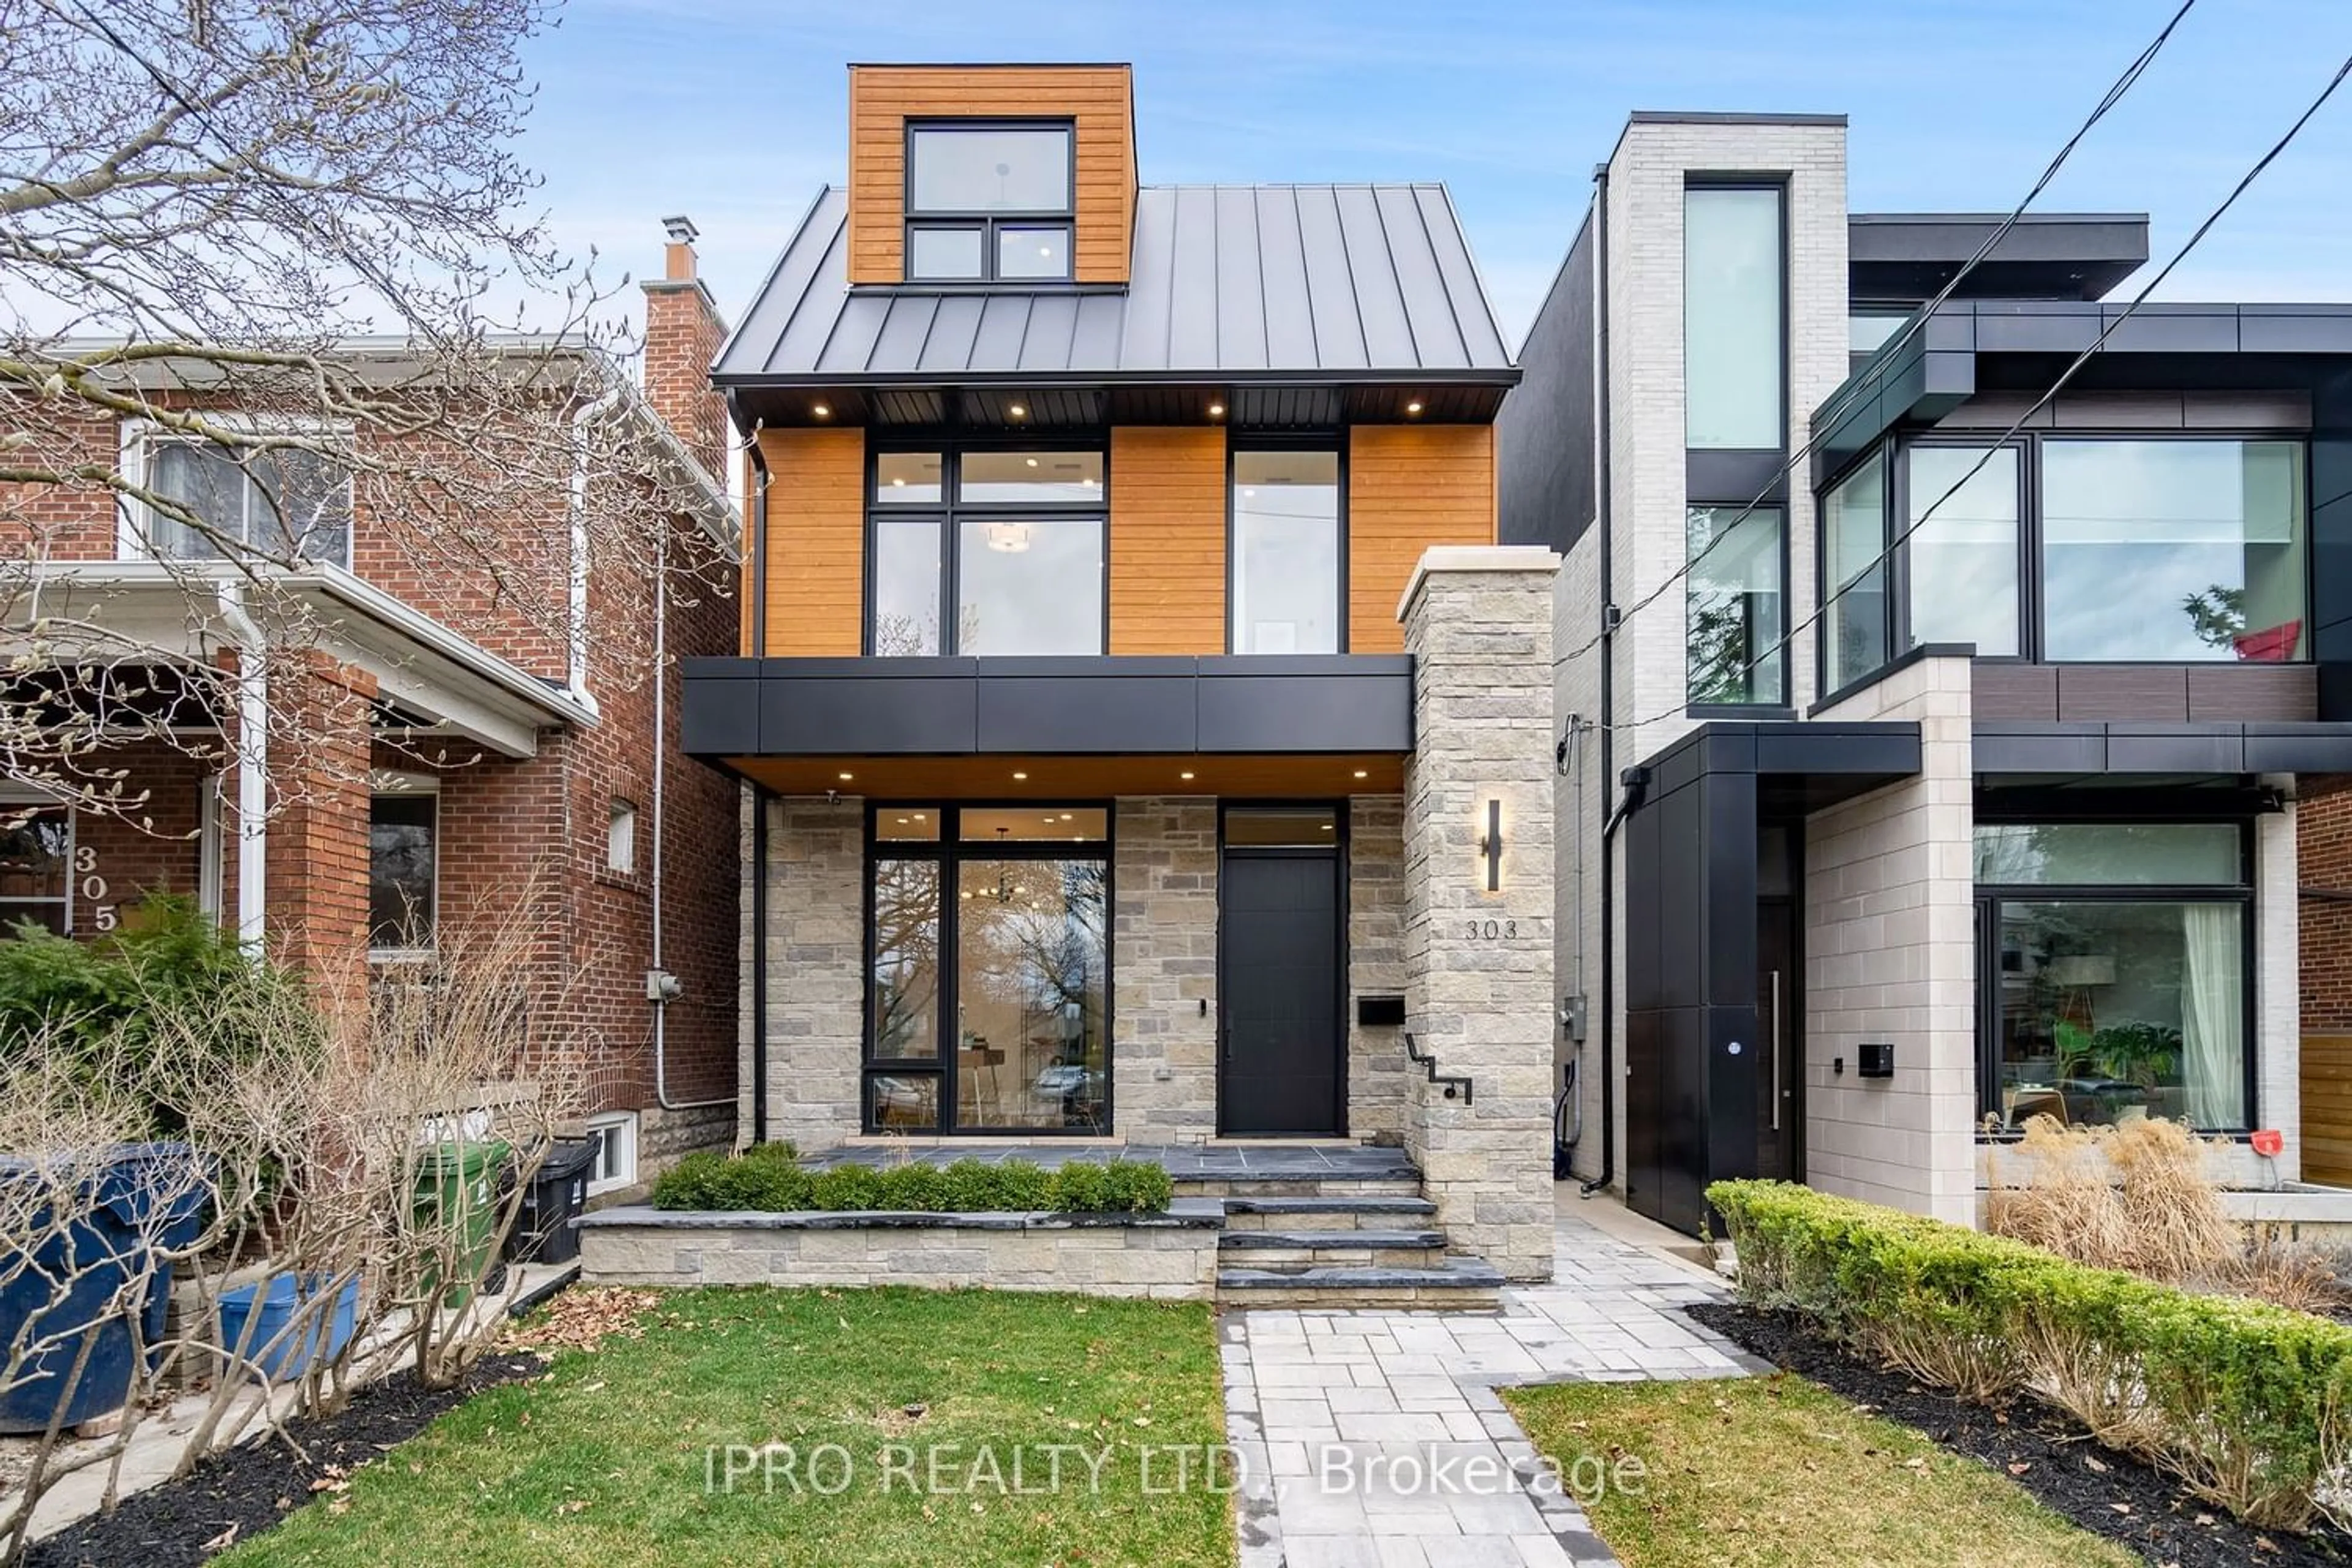 Home with brick exterior material for 303 Wychwood Ave, Toronto Ontario M6C 2T6